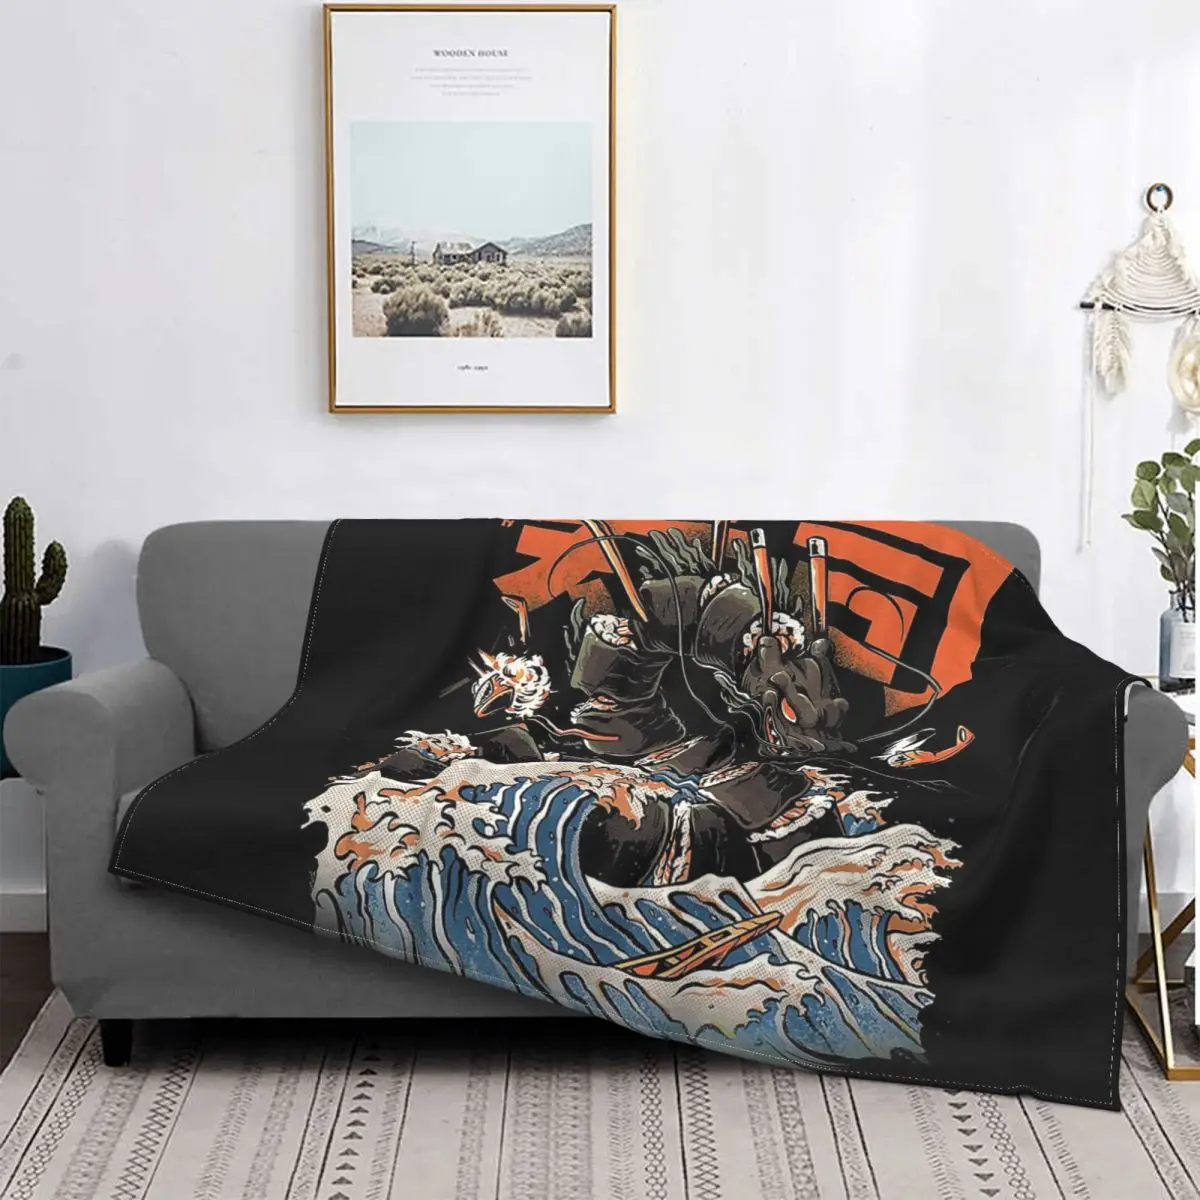 

The Black Sushi Dragon Great Wave Flannel Blanket food kanagawa kaiju Vintage Throw Blankets for Home Plush Thin Quilt